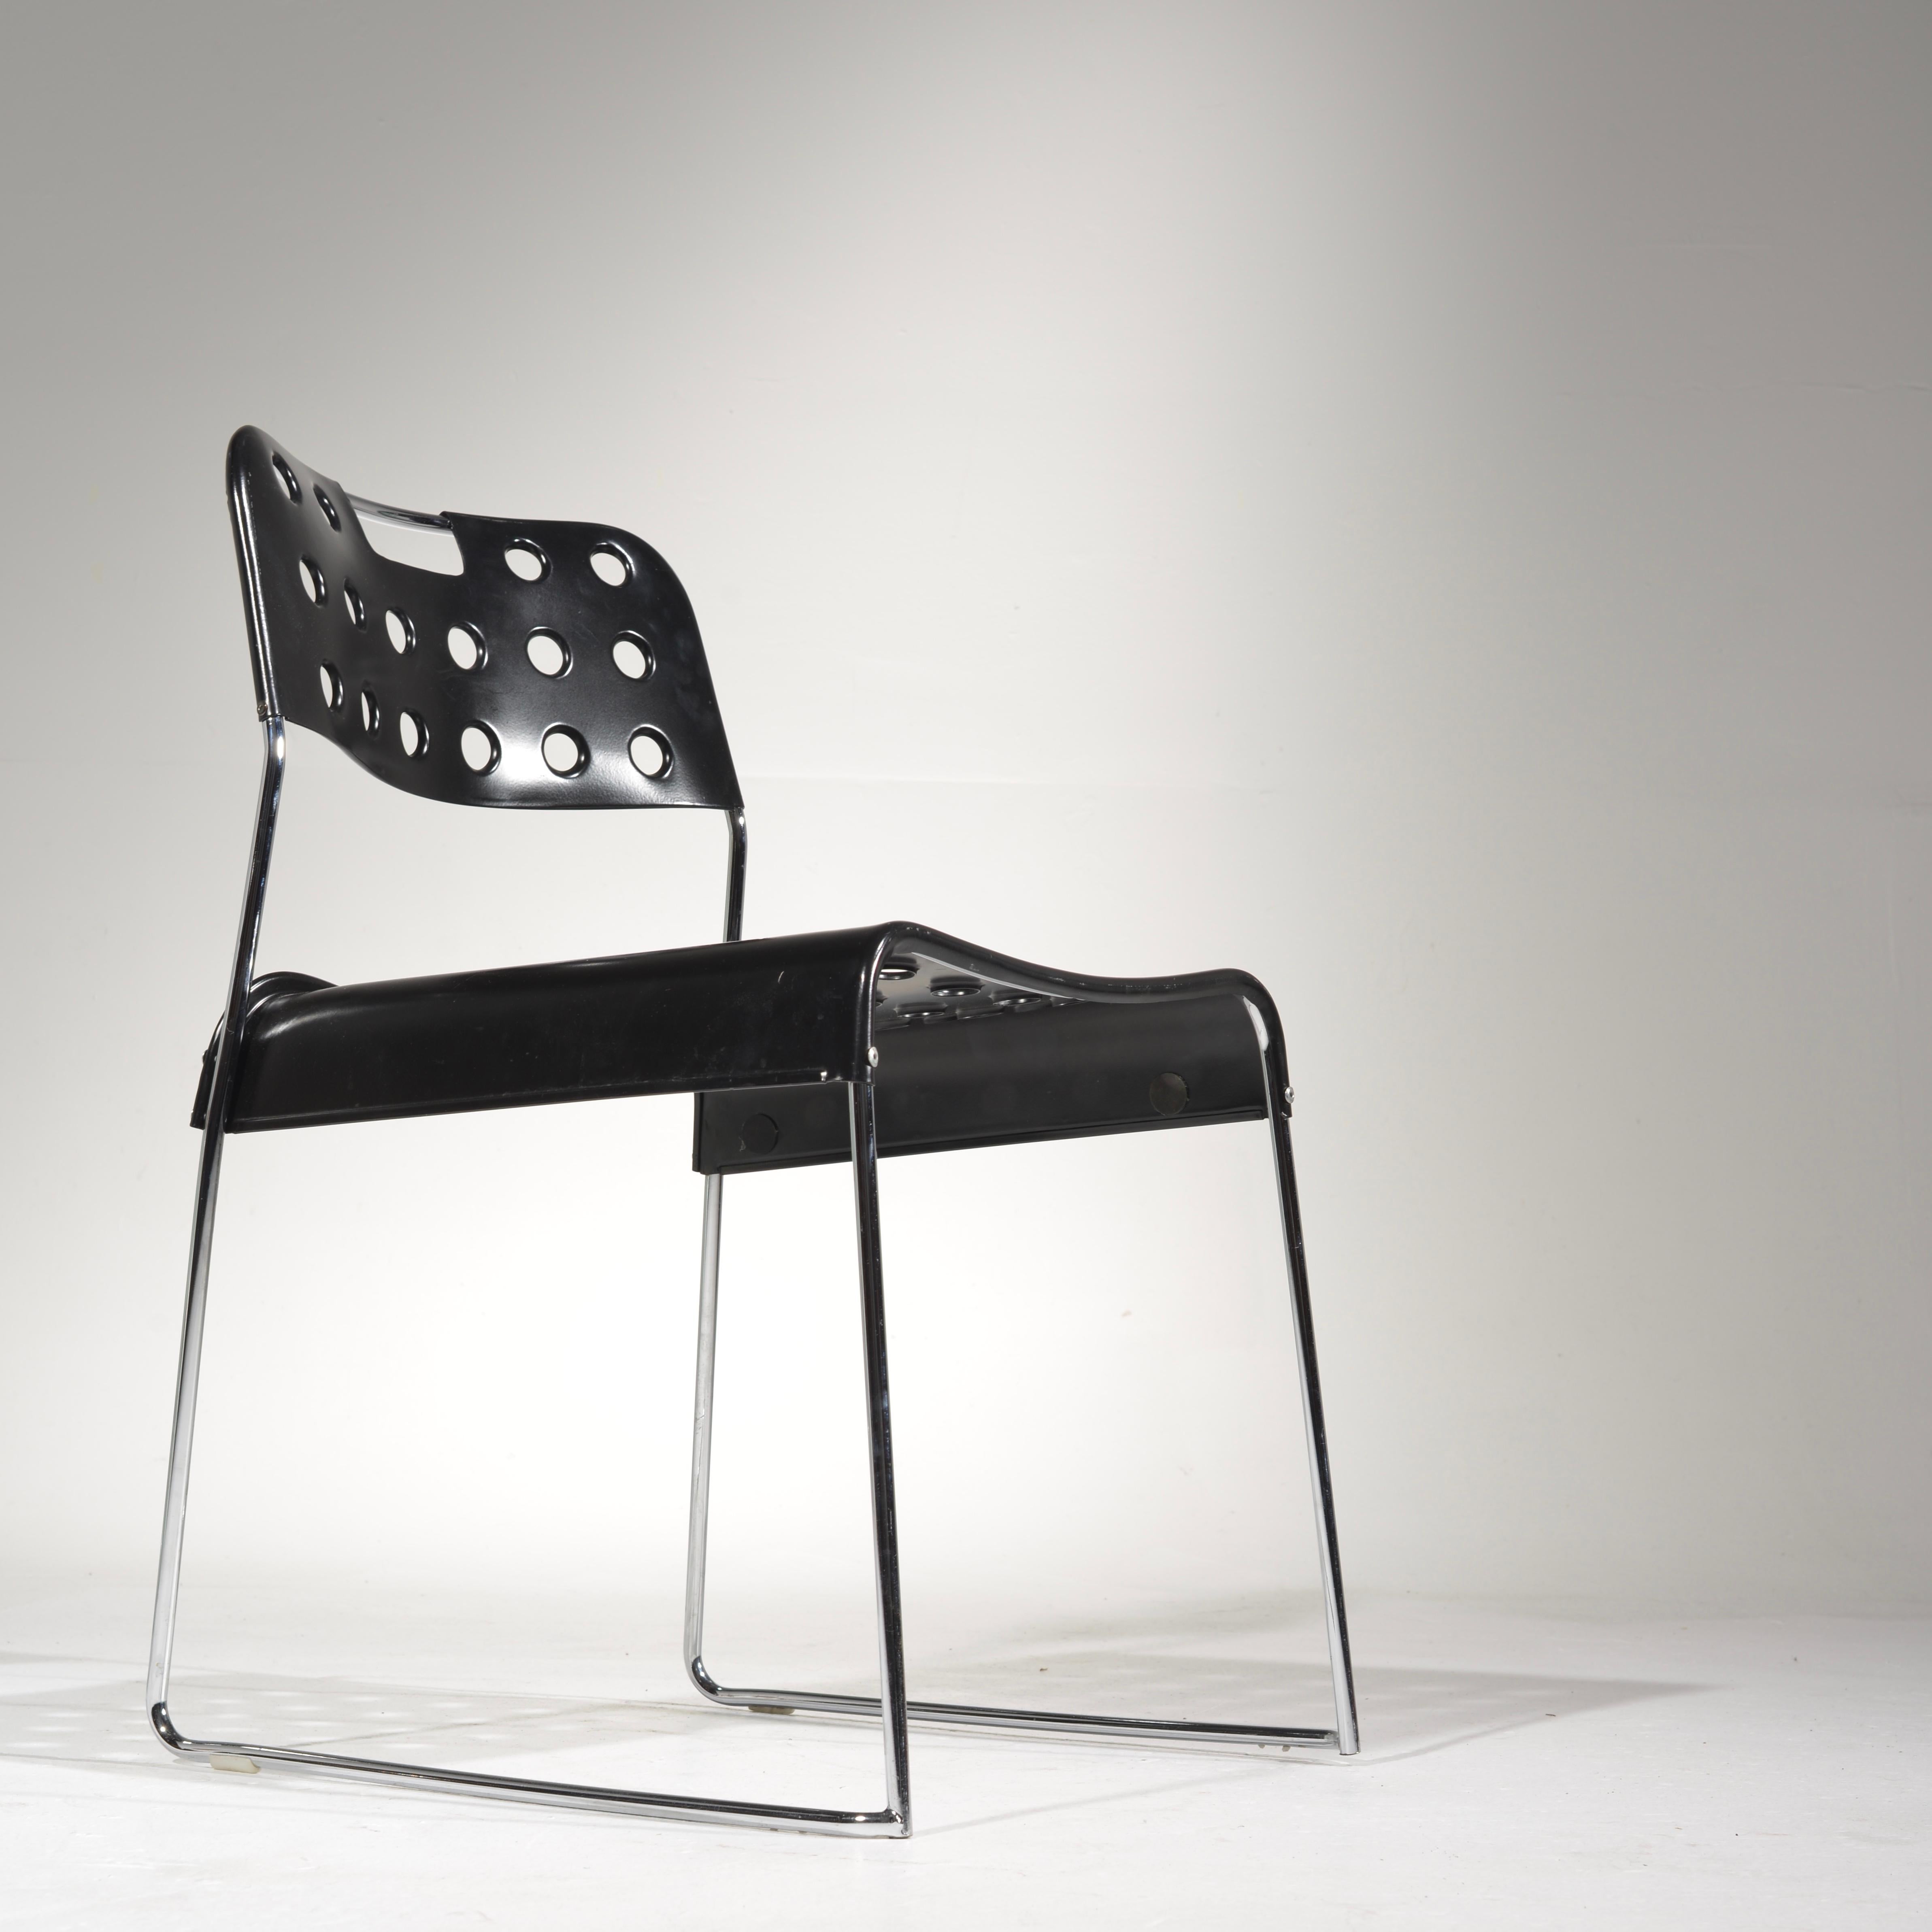 A striking, functional and thoroughly modern set. The chair is easy to use and store.